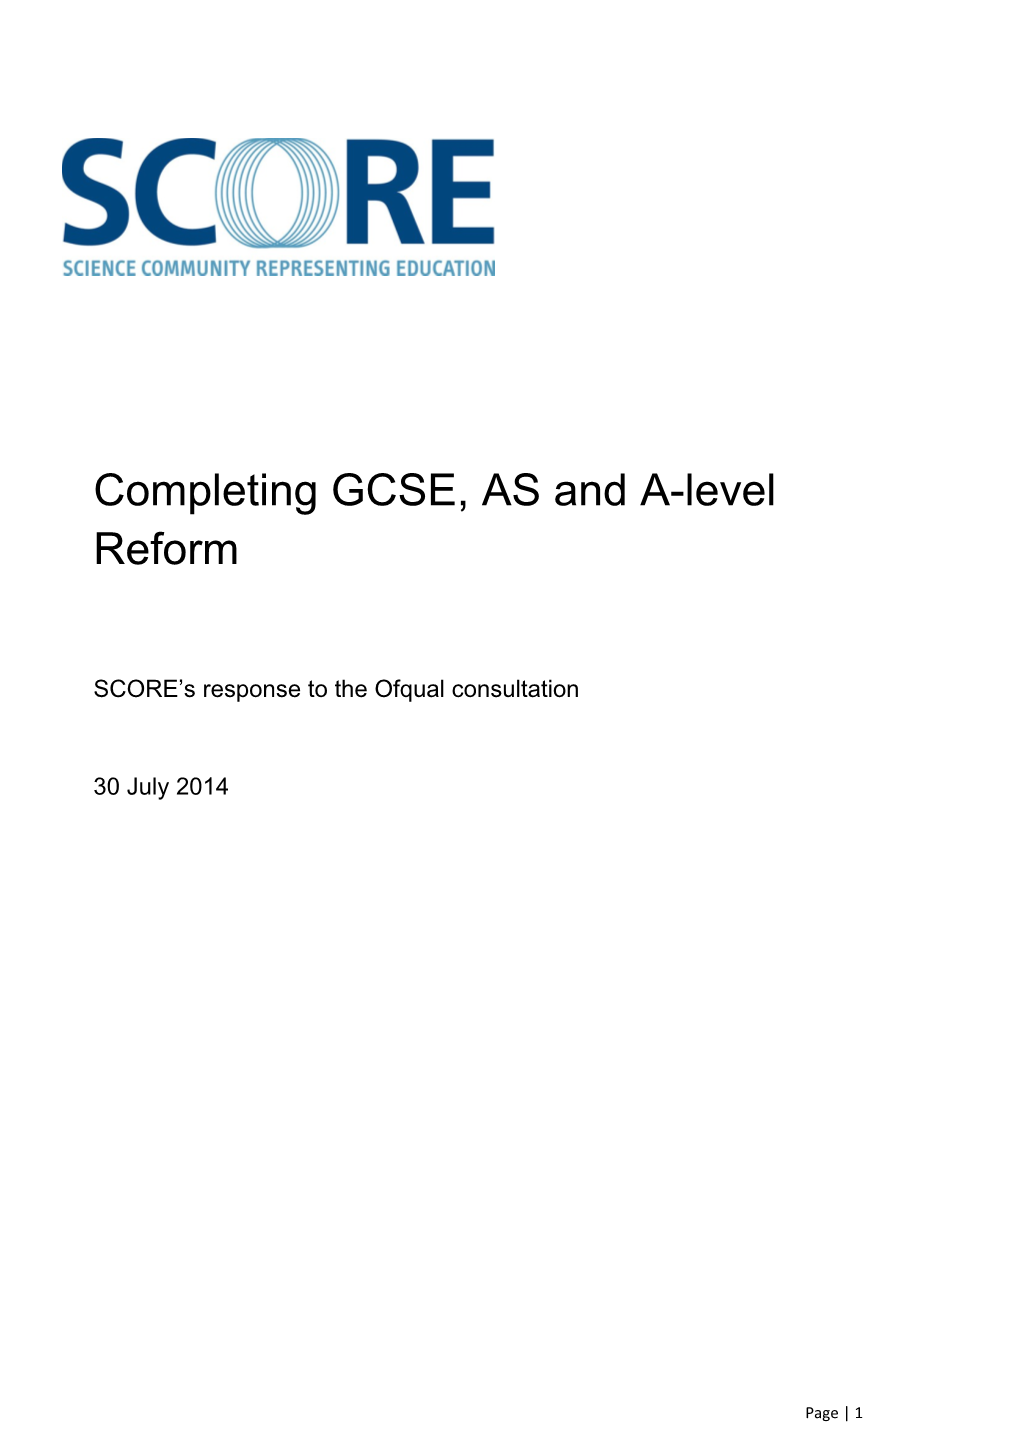 Completing GCSE, AS and A-Level Reform